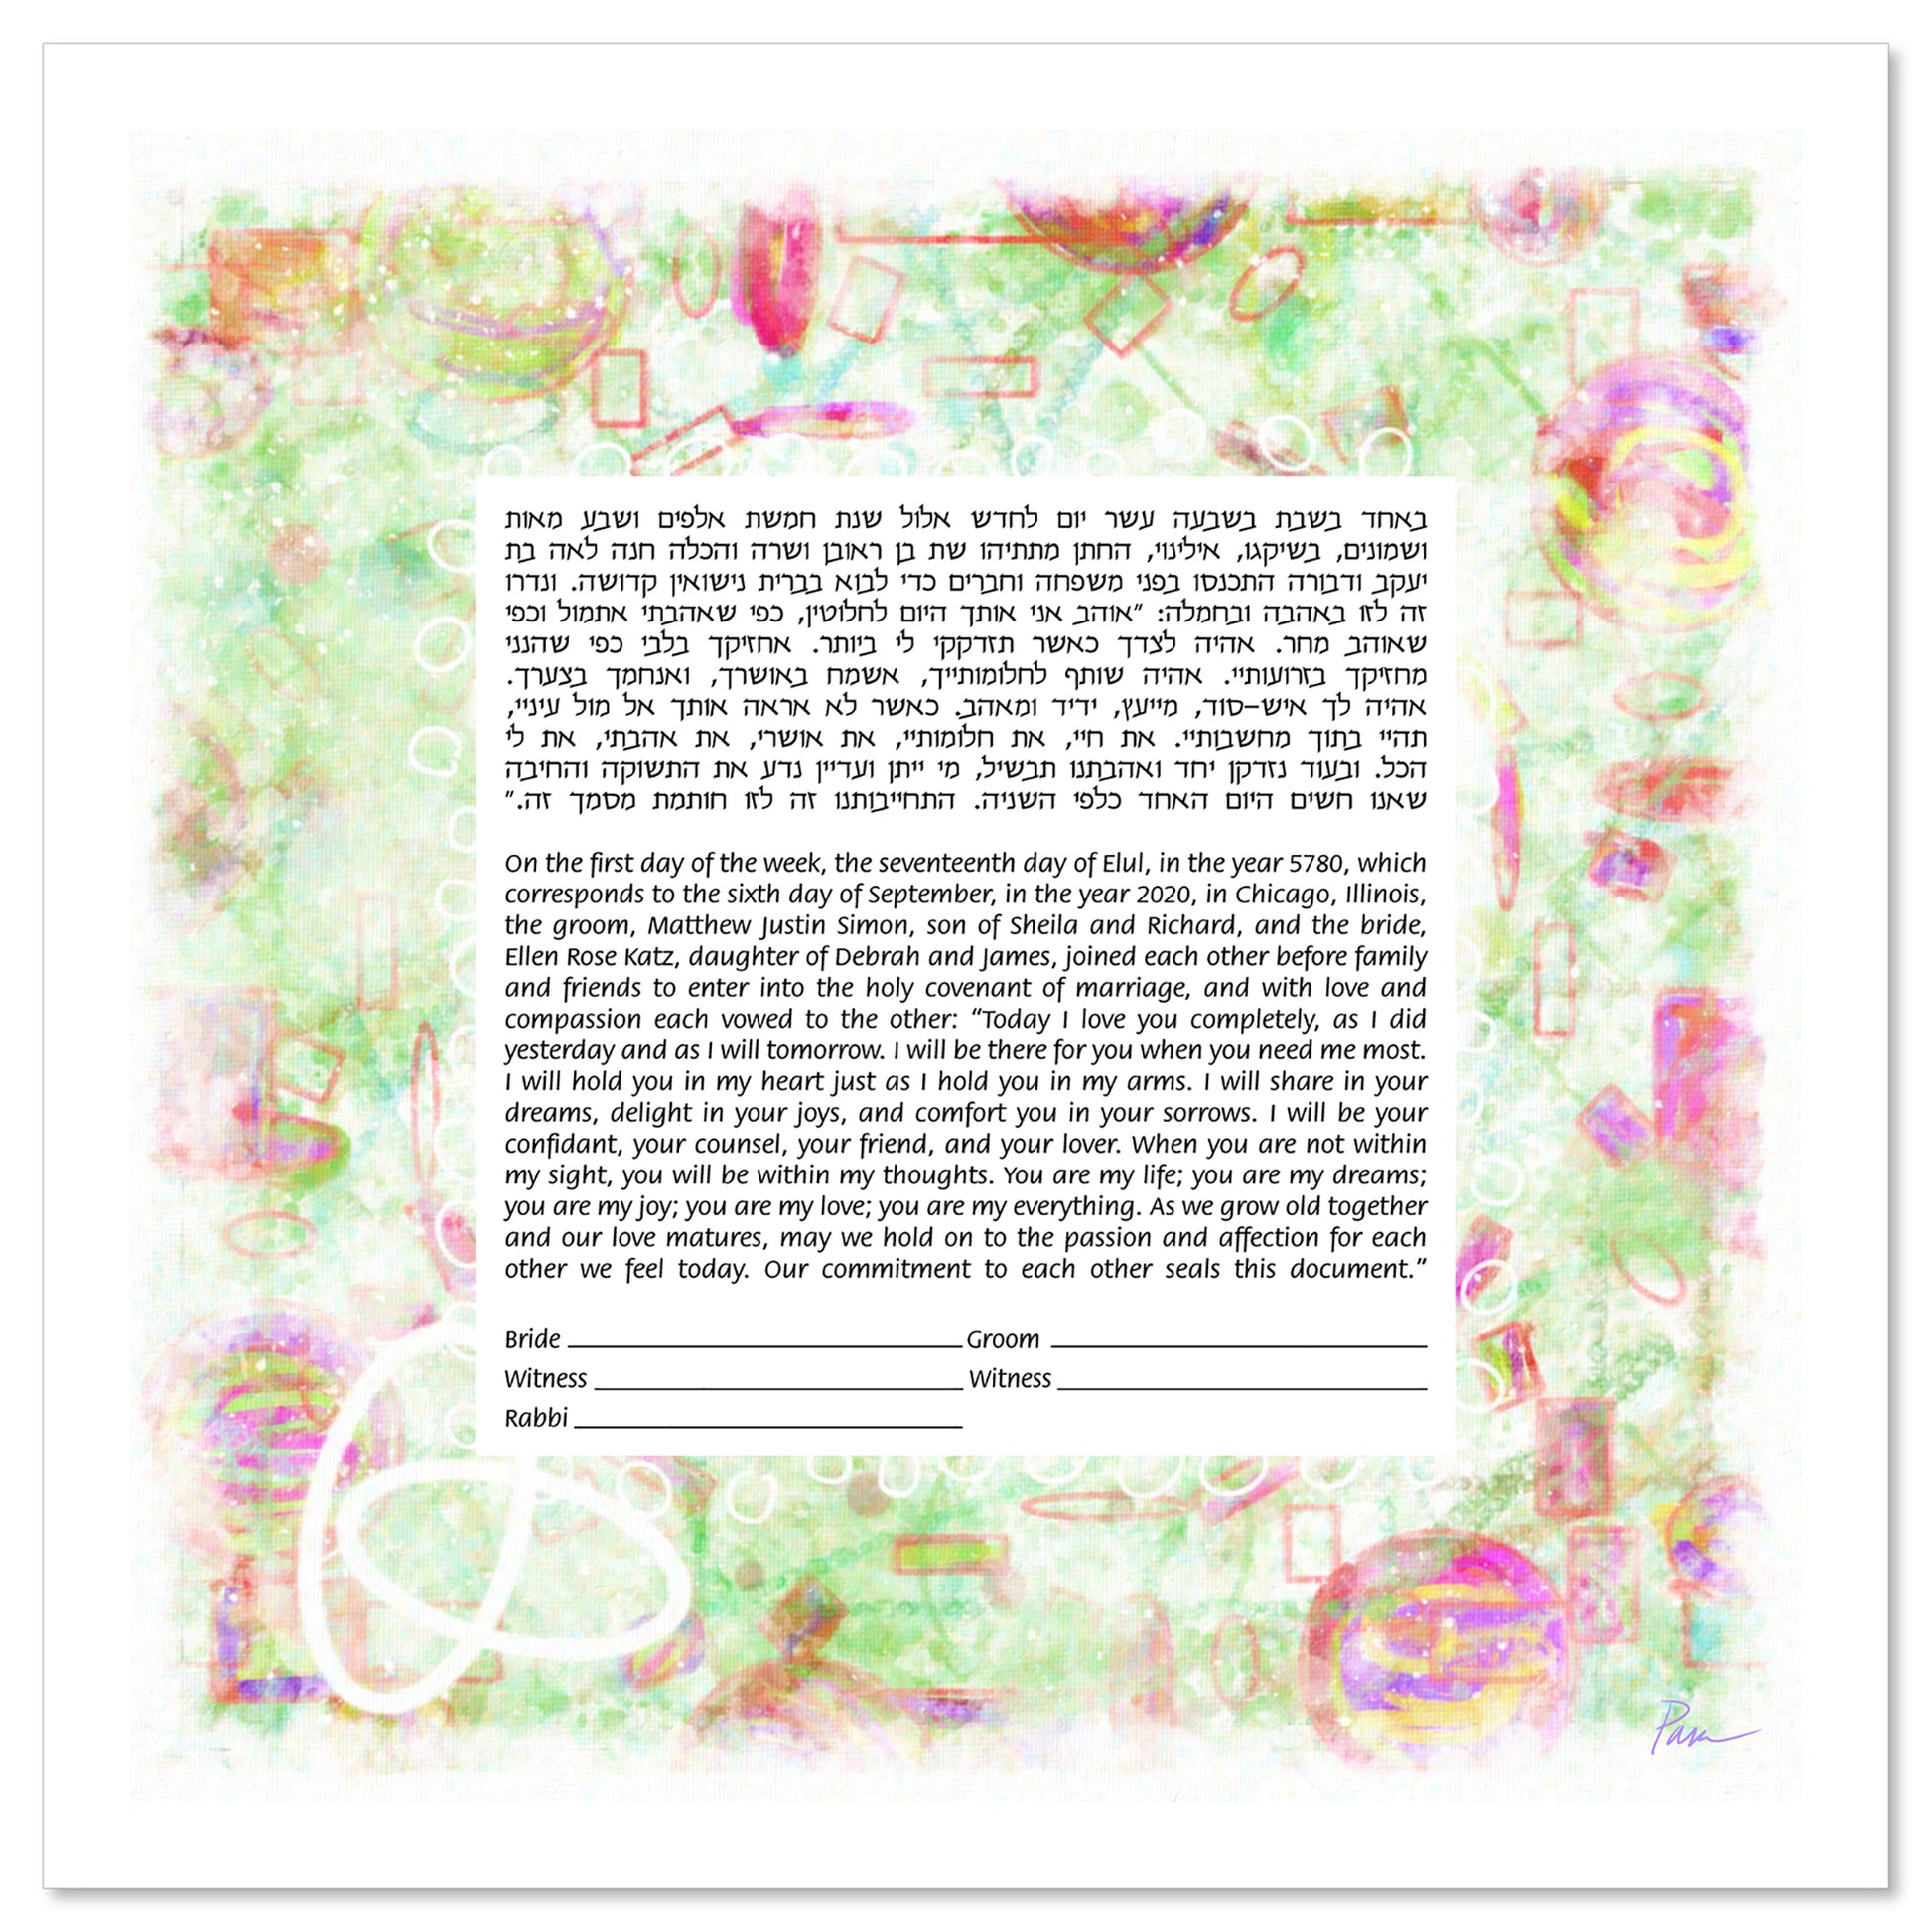 Galaxy Bands Green ketubah by Pam Parker features a square text surrounded by mid-century modern shapes in multicolor shades over a green background.